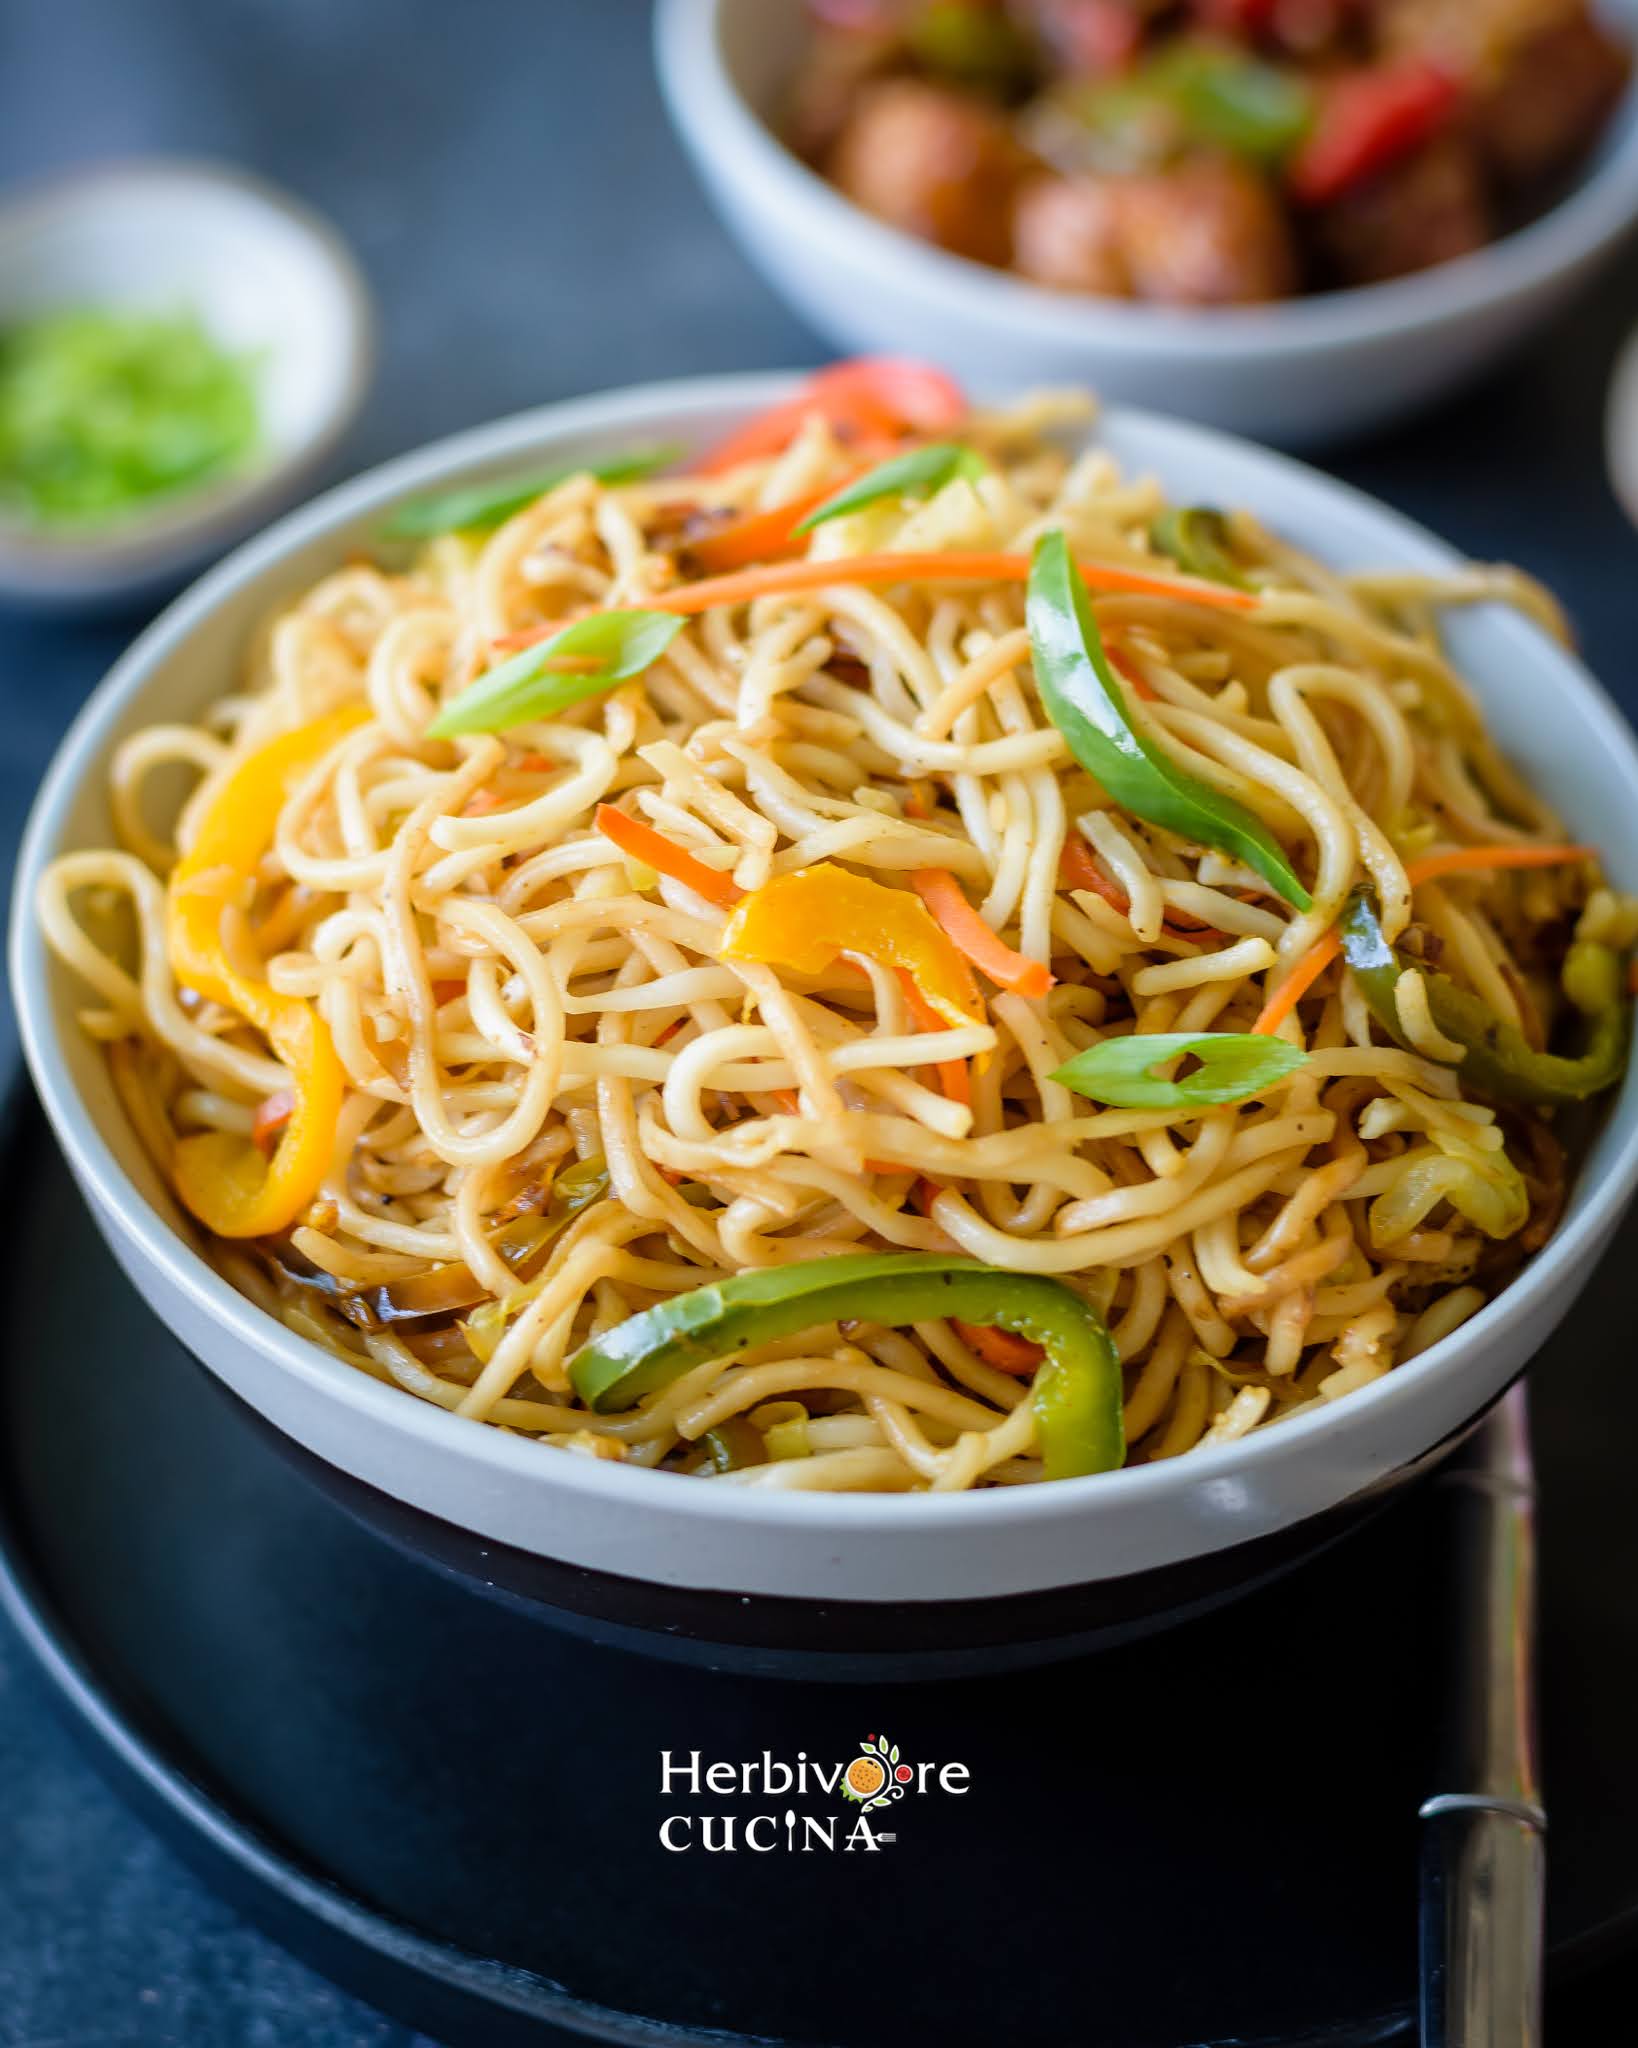 Vegetarian Hakka Noodles in a bowl shot from the side with a fork and plate on the side.